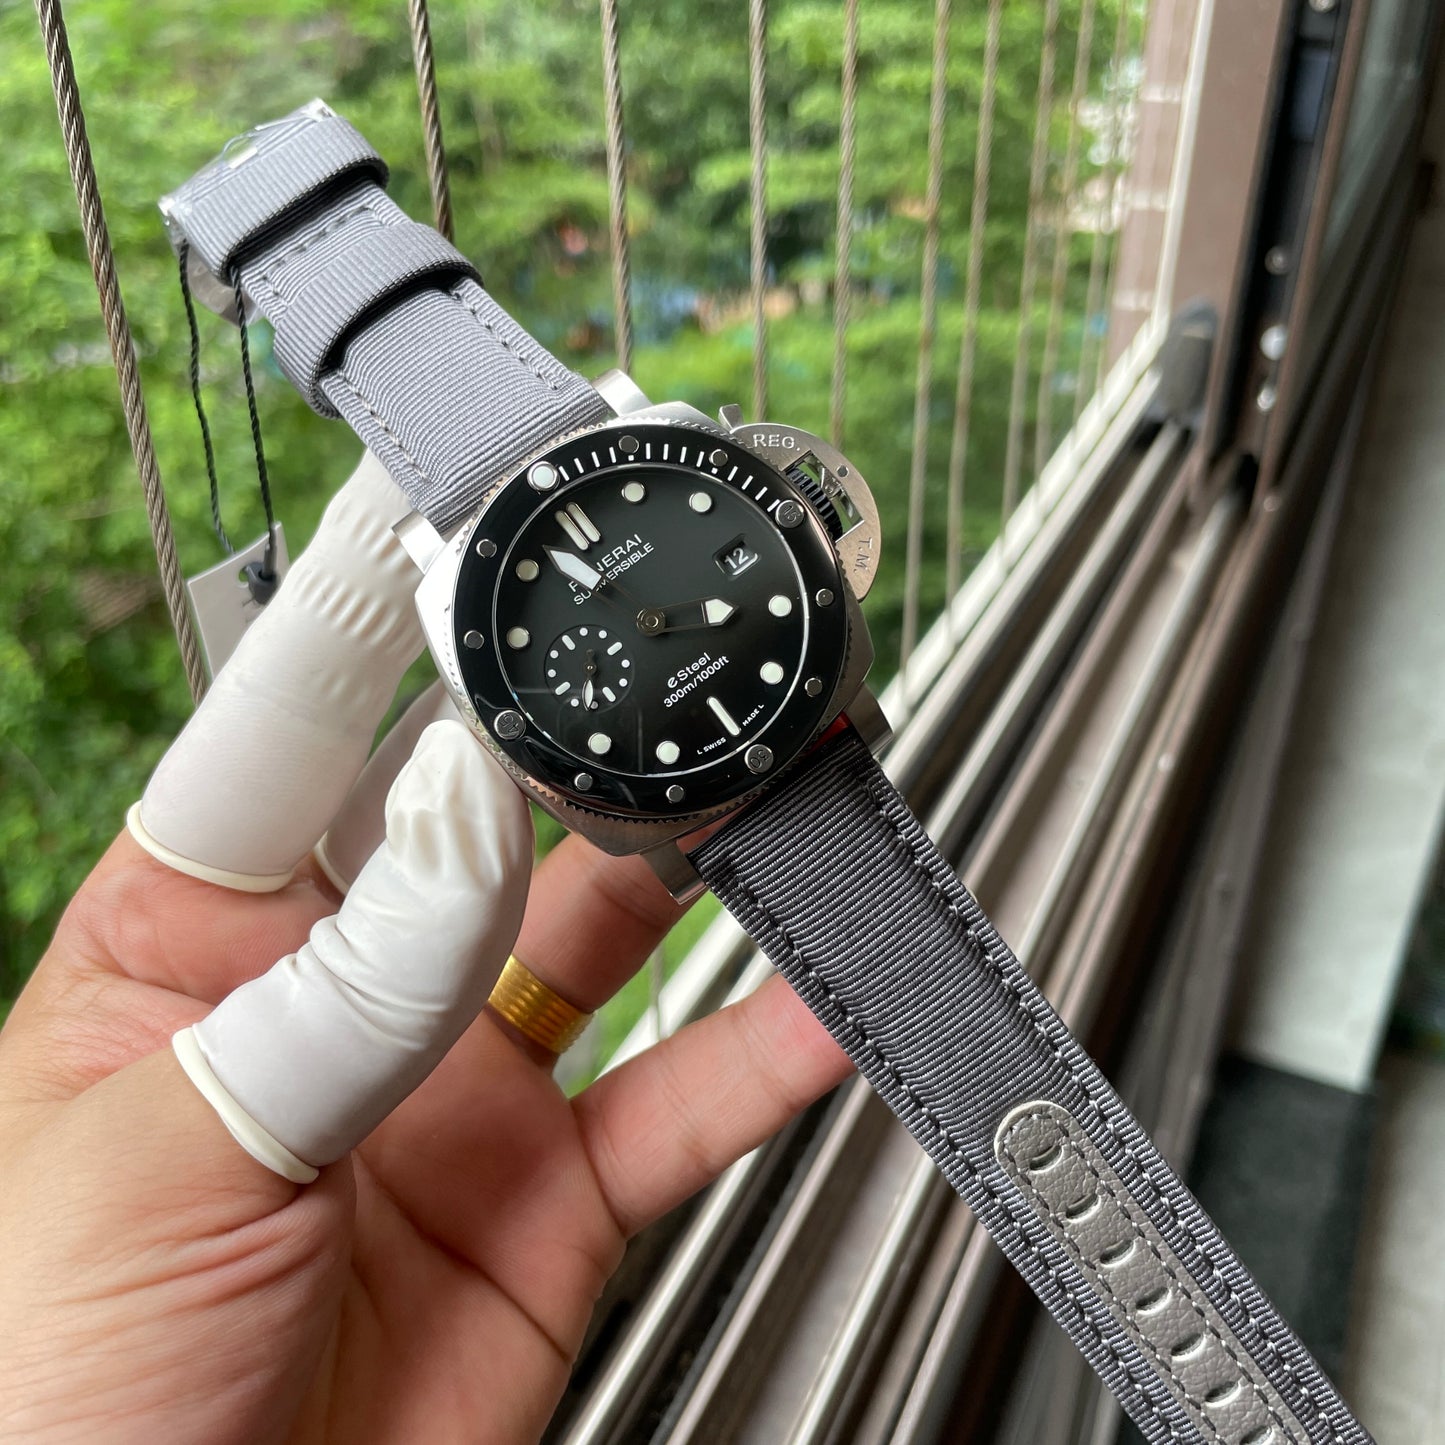 SBF Panerai Submersible PAM01288 1:1 Best Edition VS Factory Gray Dial